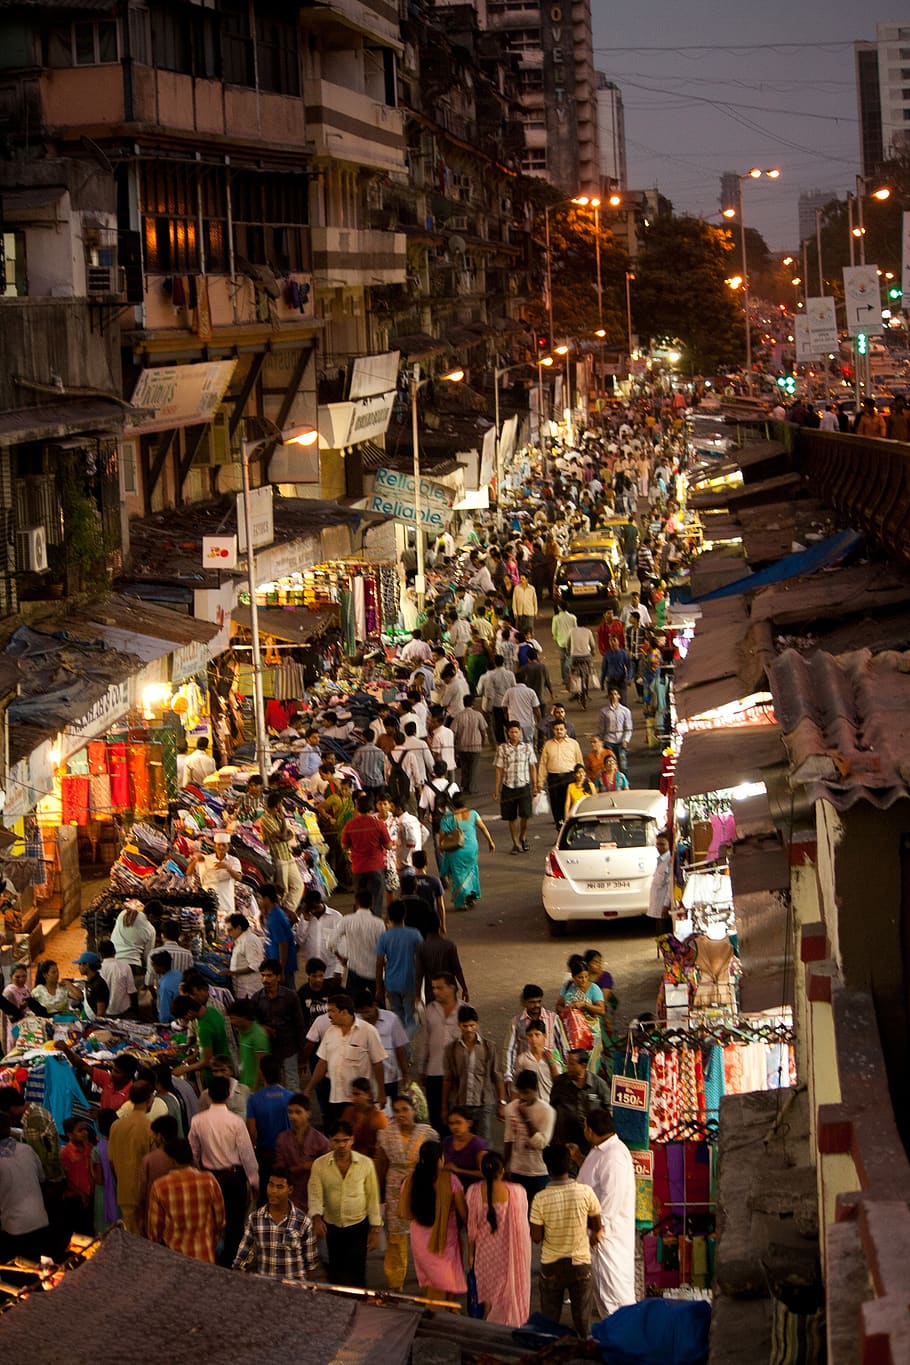 crowded, street, mumbai, bombay, crowd, people, india, overcrowded, overpopulation, indian